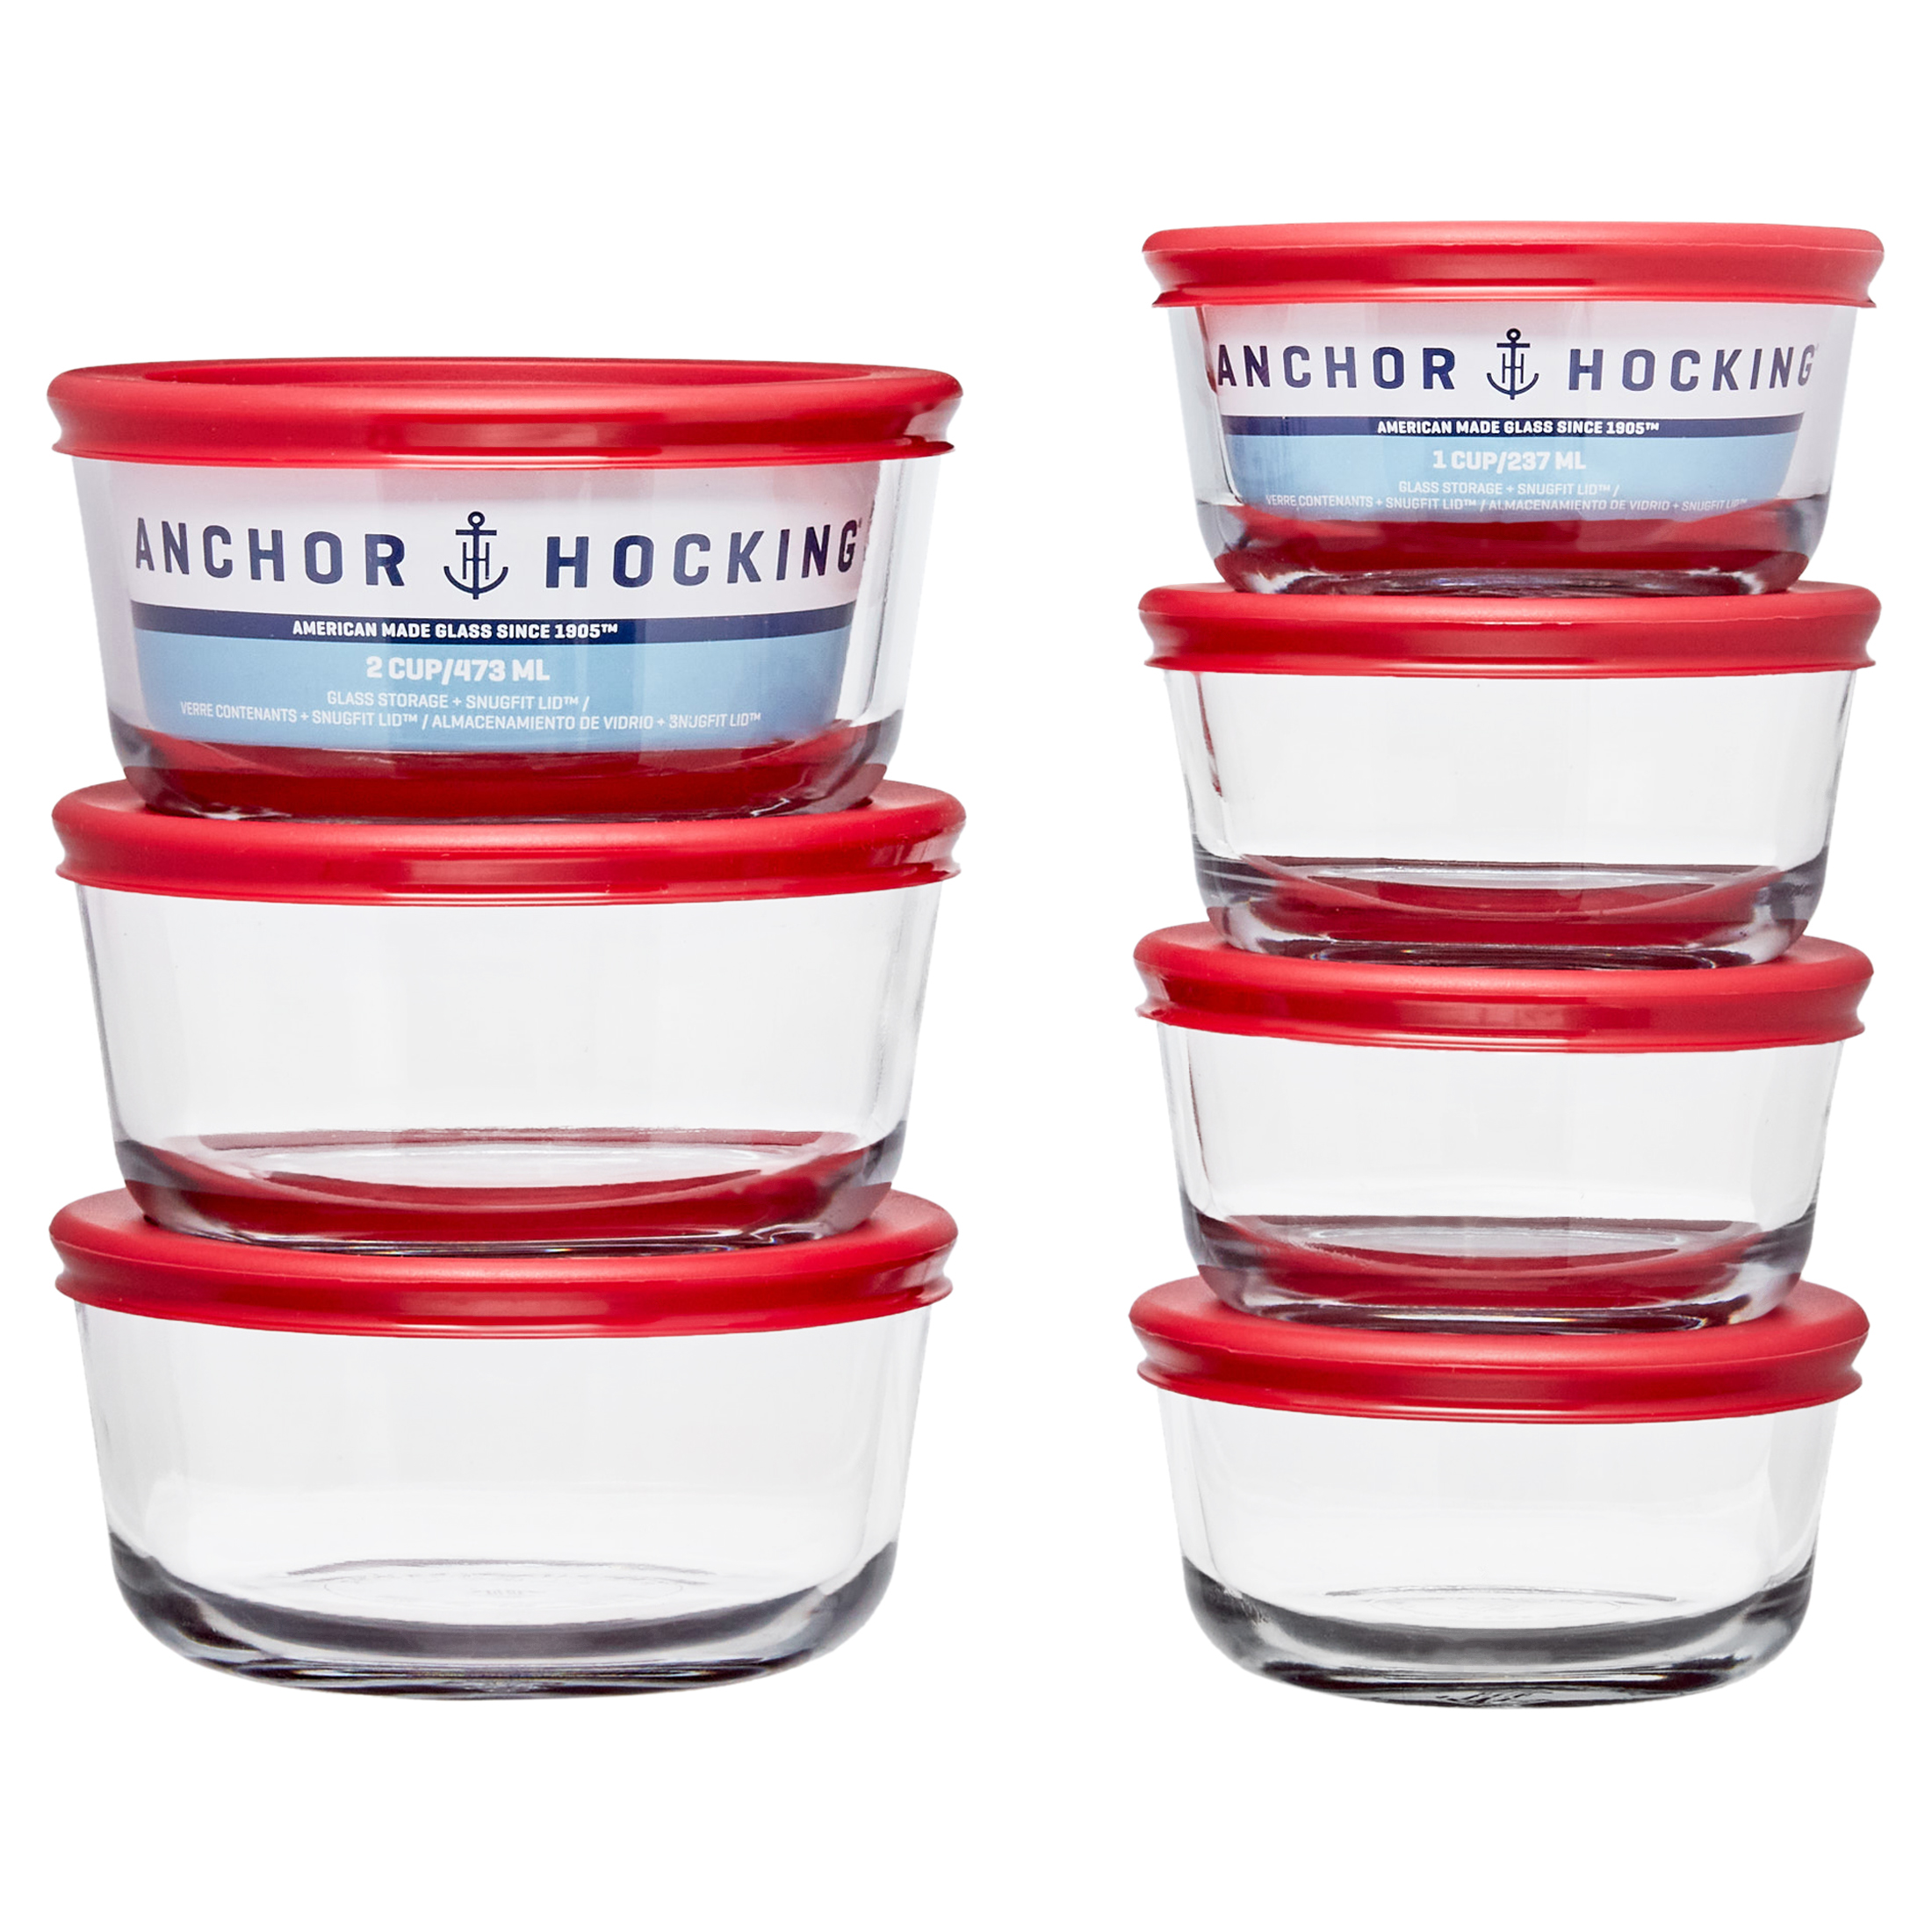 Anchor Hocking 14-Piece Clear Glass Round Food Storage Value Pack with Red Lids - image 1 of 11